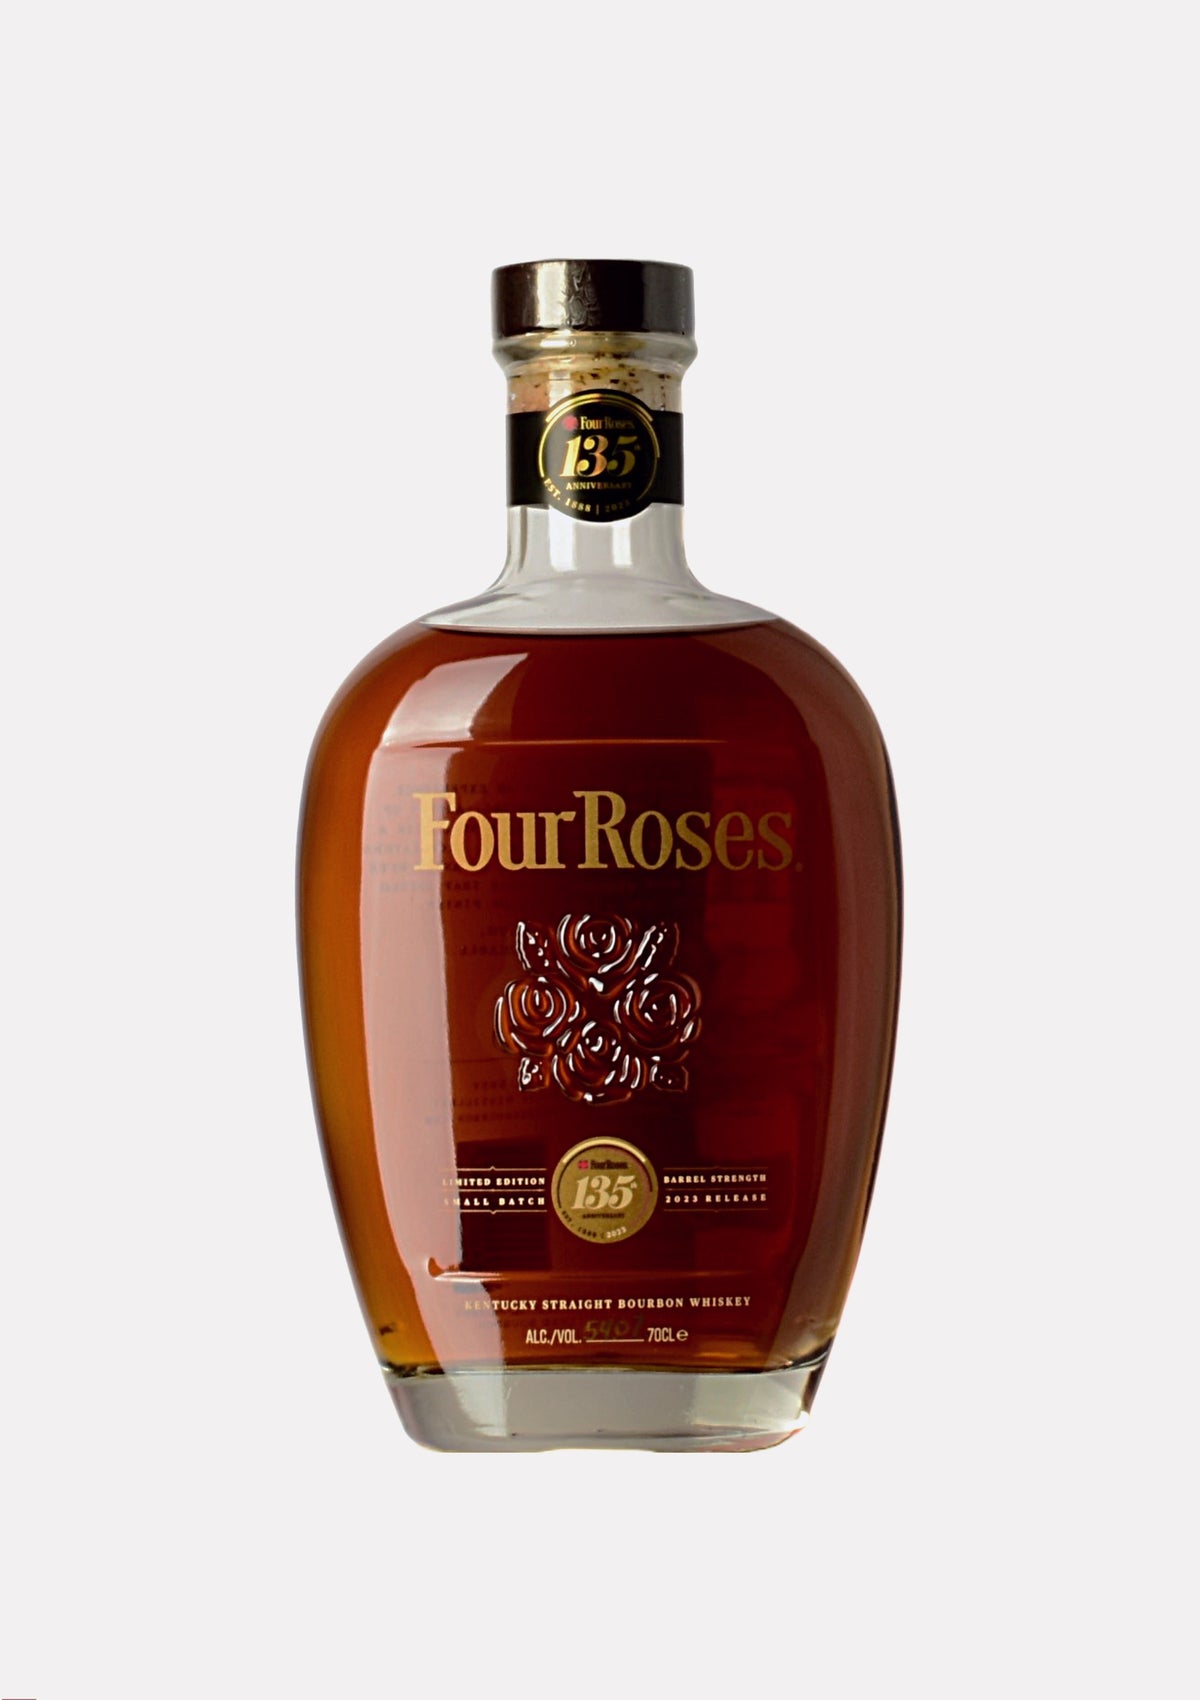 Four Roses Limited Edition 135th Anniversary Edition